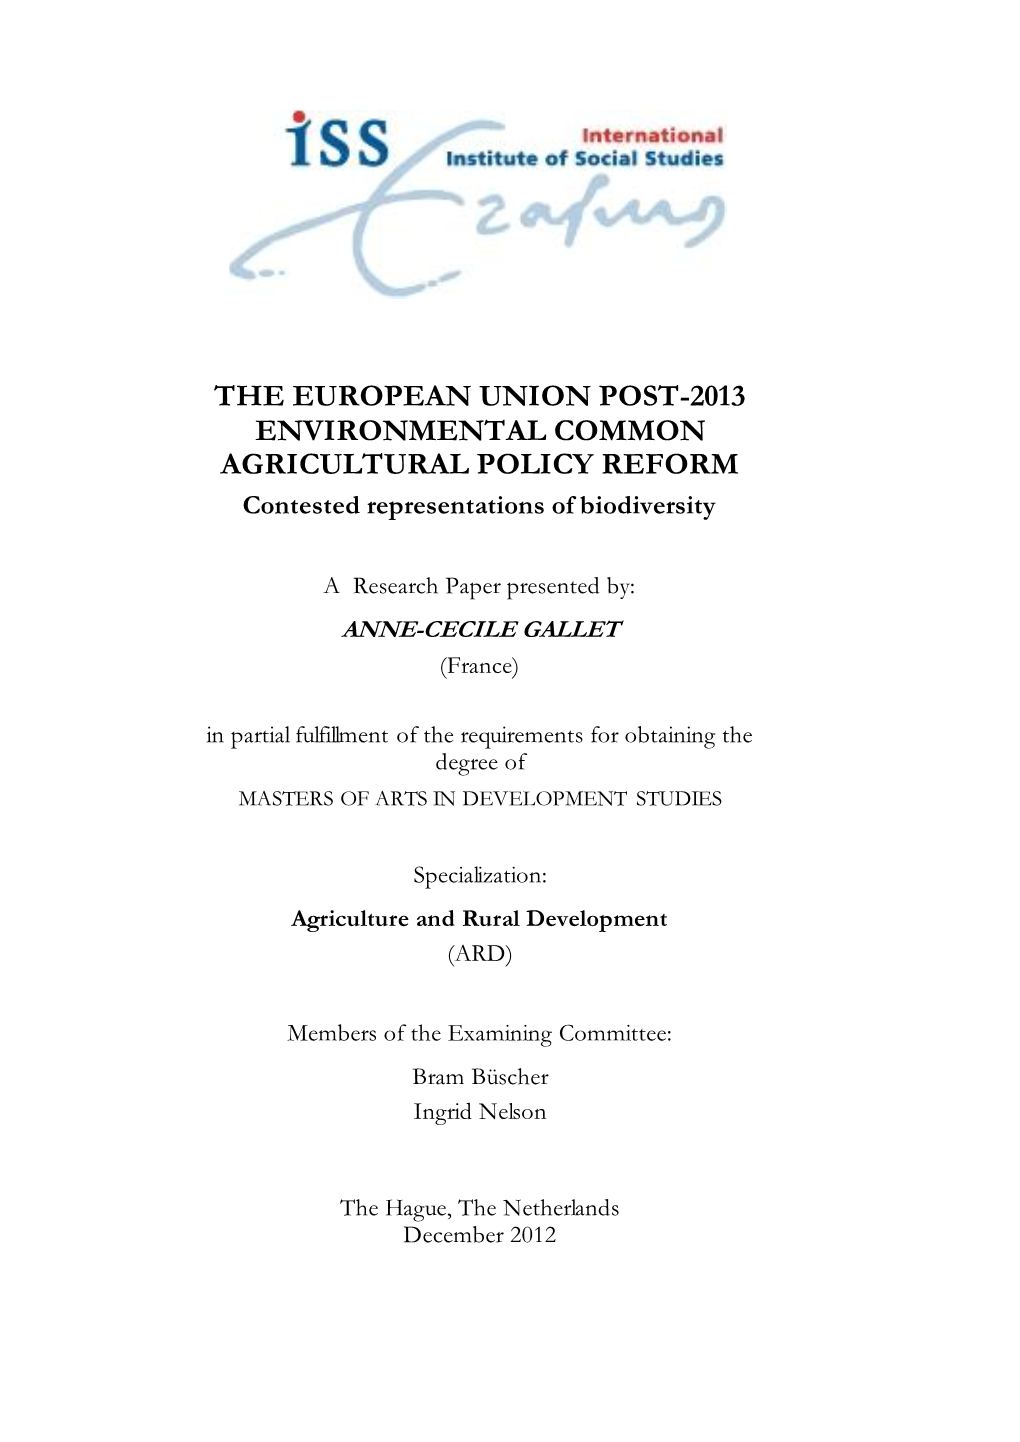 THE EUROPEAN UNION POST-2013 ENVIRONMENTAL COMMON AGRICULTURAL POLICY REFORM Contested Representations of Biodiversity